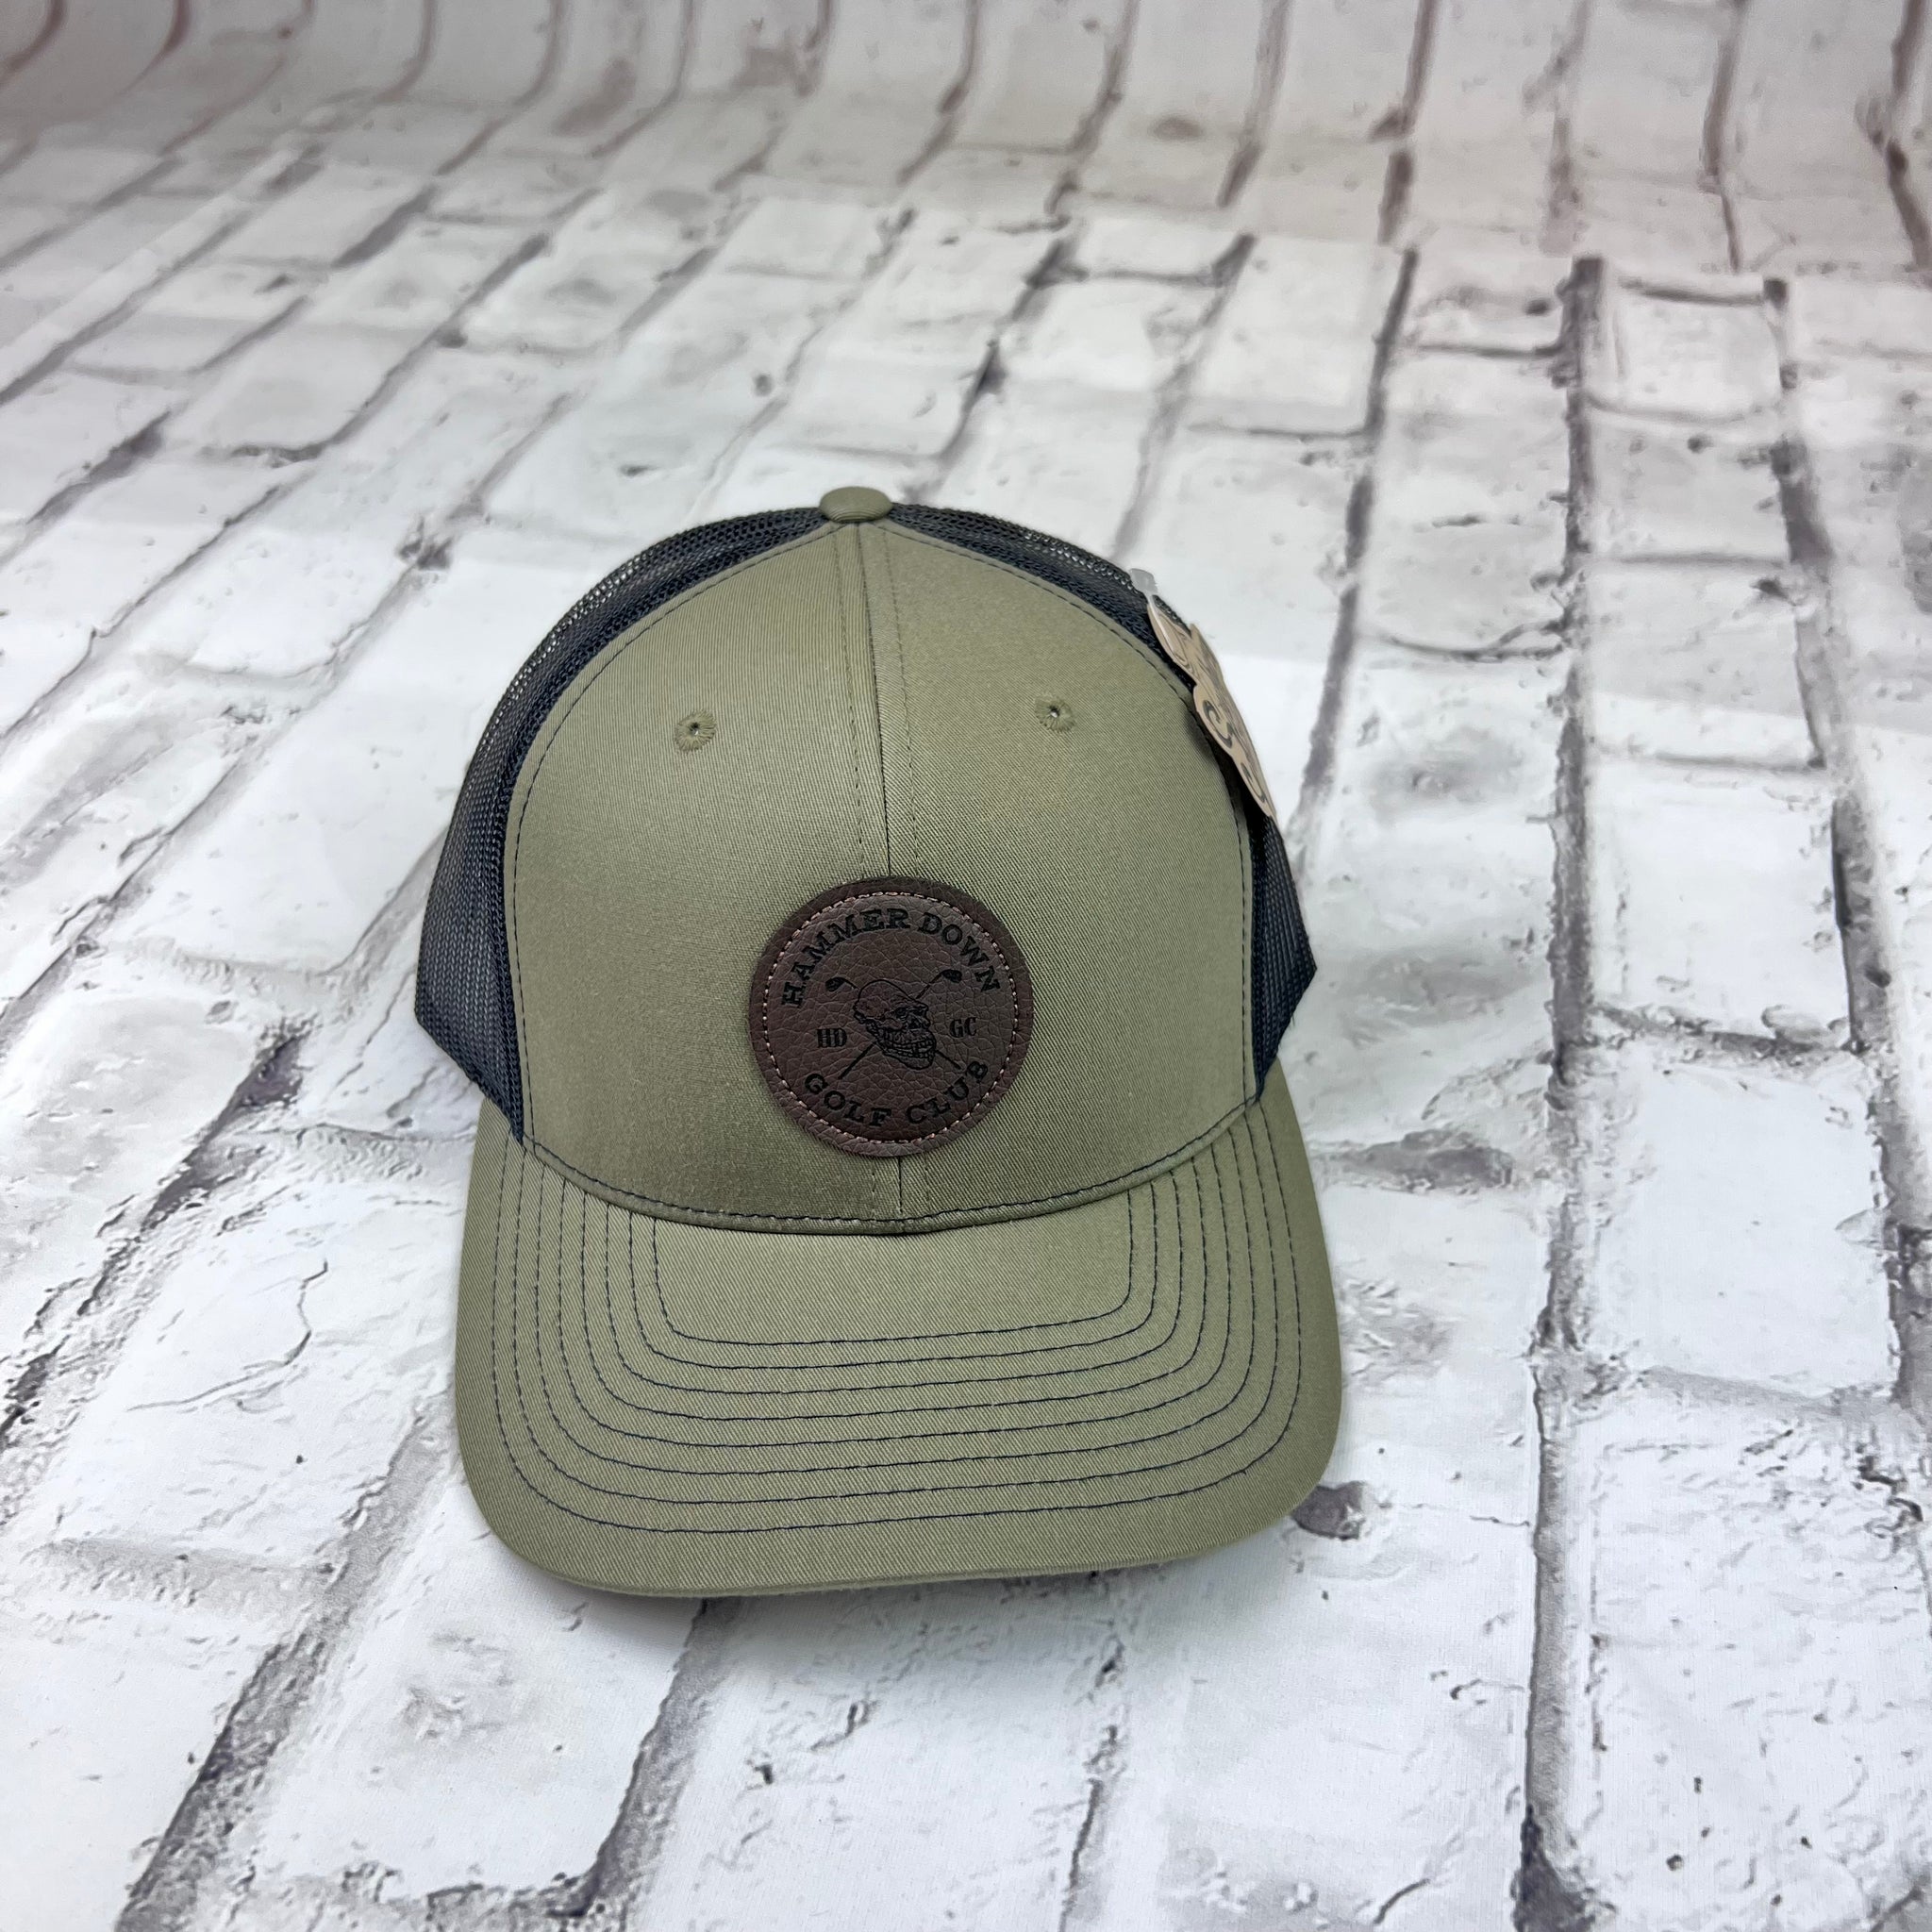 Hammer Down "Golf Club" Hat - Loden and Black with Leather Patch